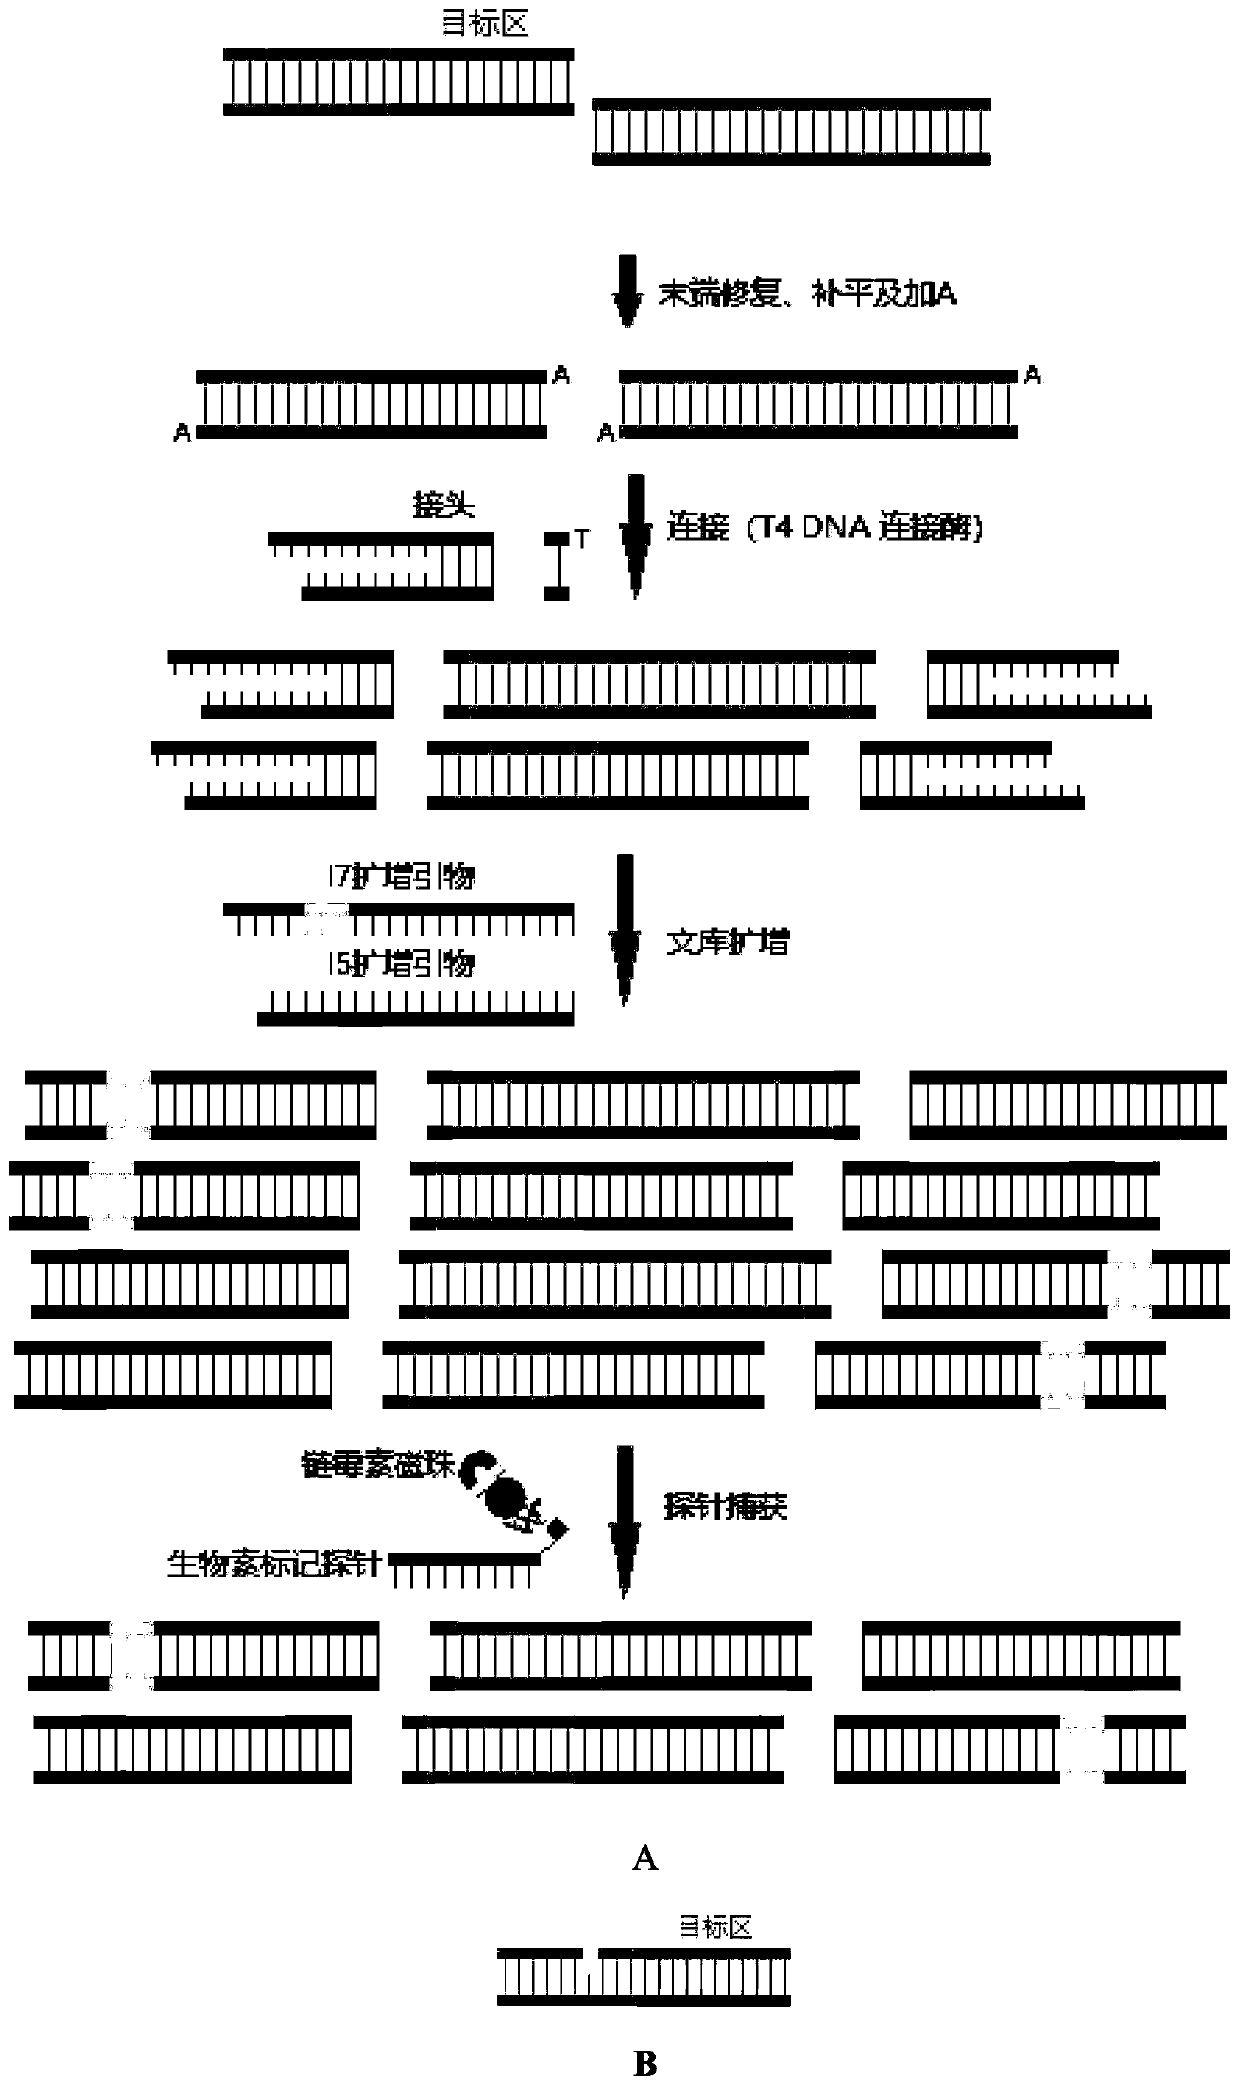 Library building method based on high-throughput sequencing